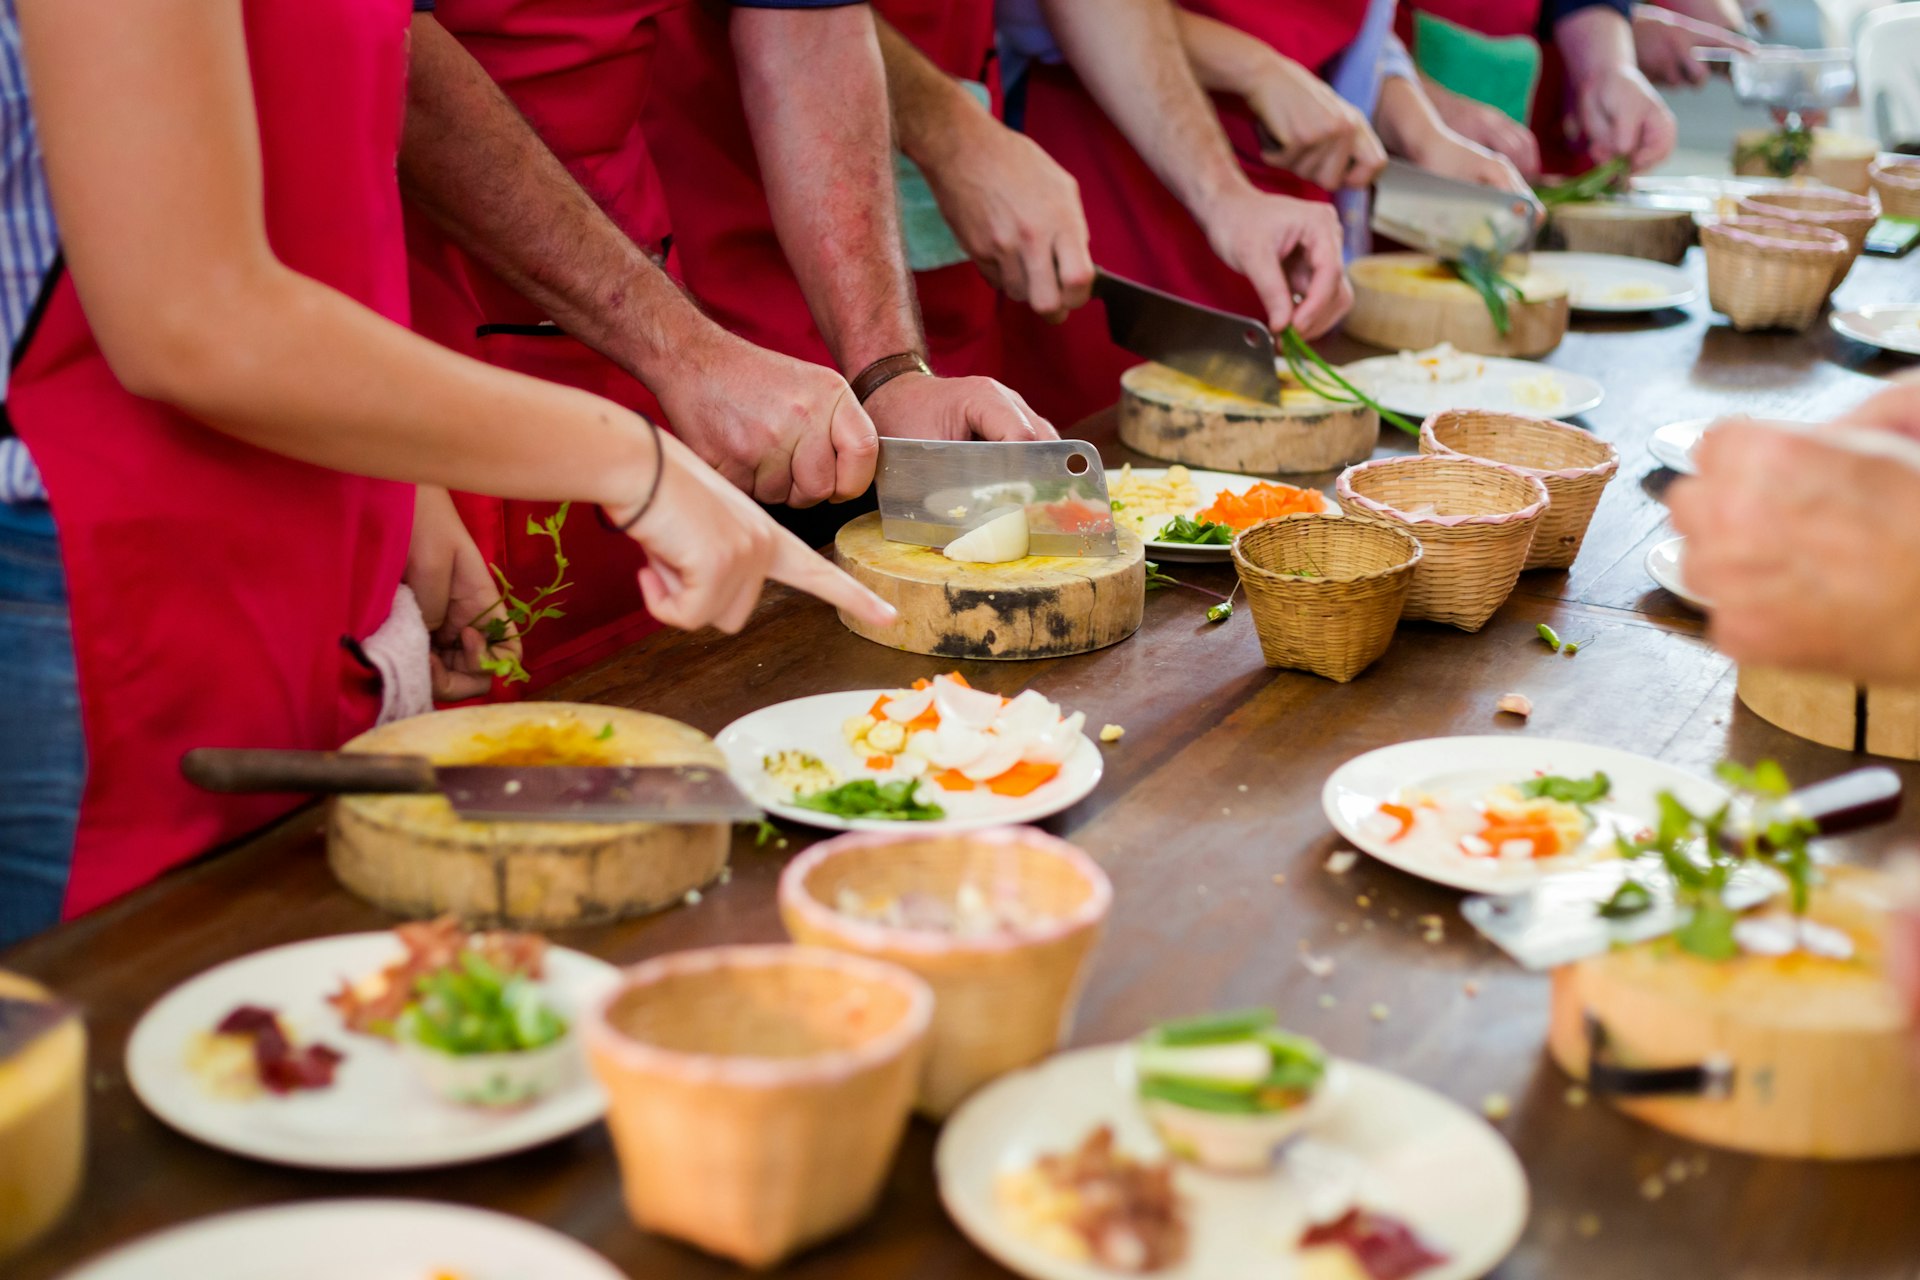 Participants preparing Thai food with chopping knives during a cooking class in Chiang Mai.